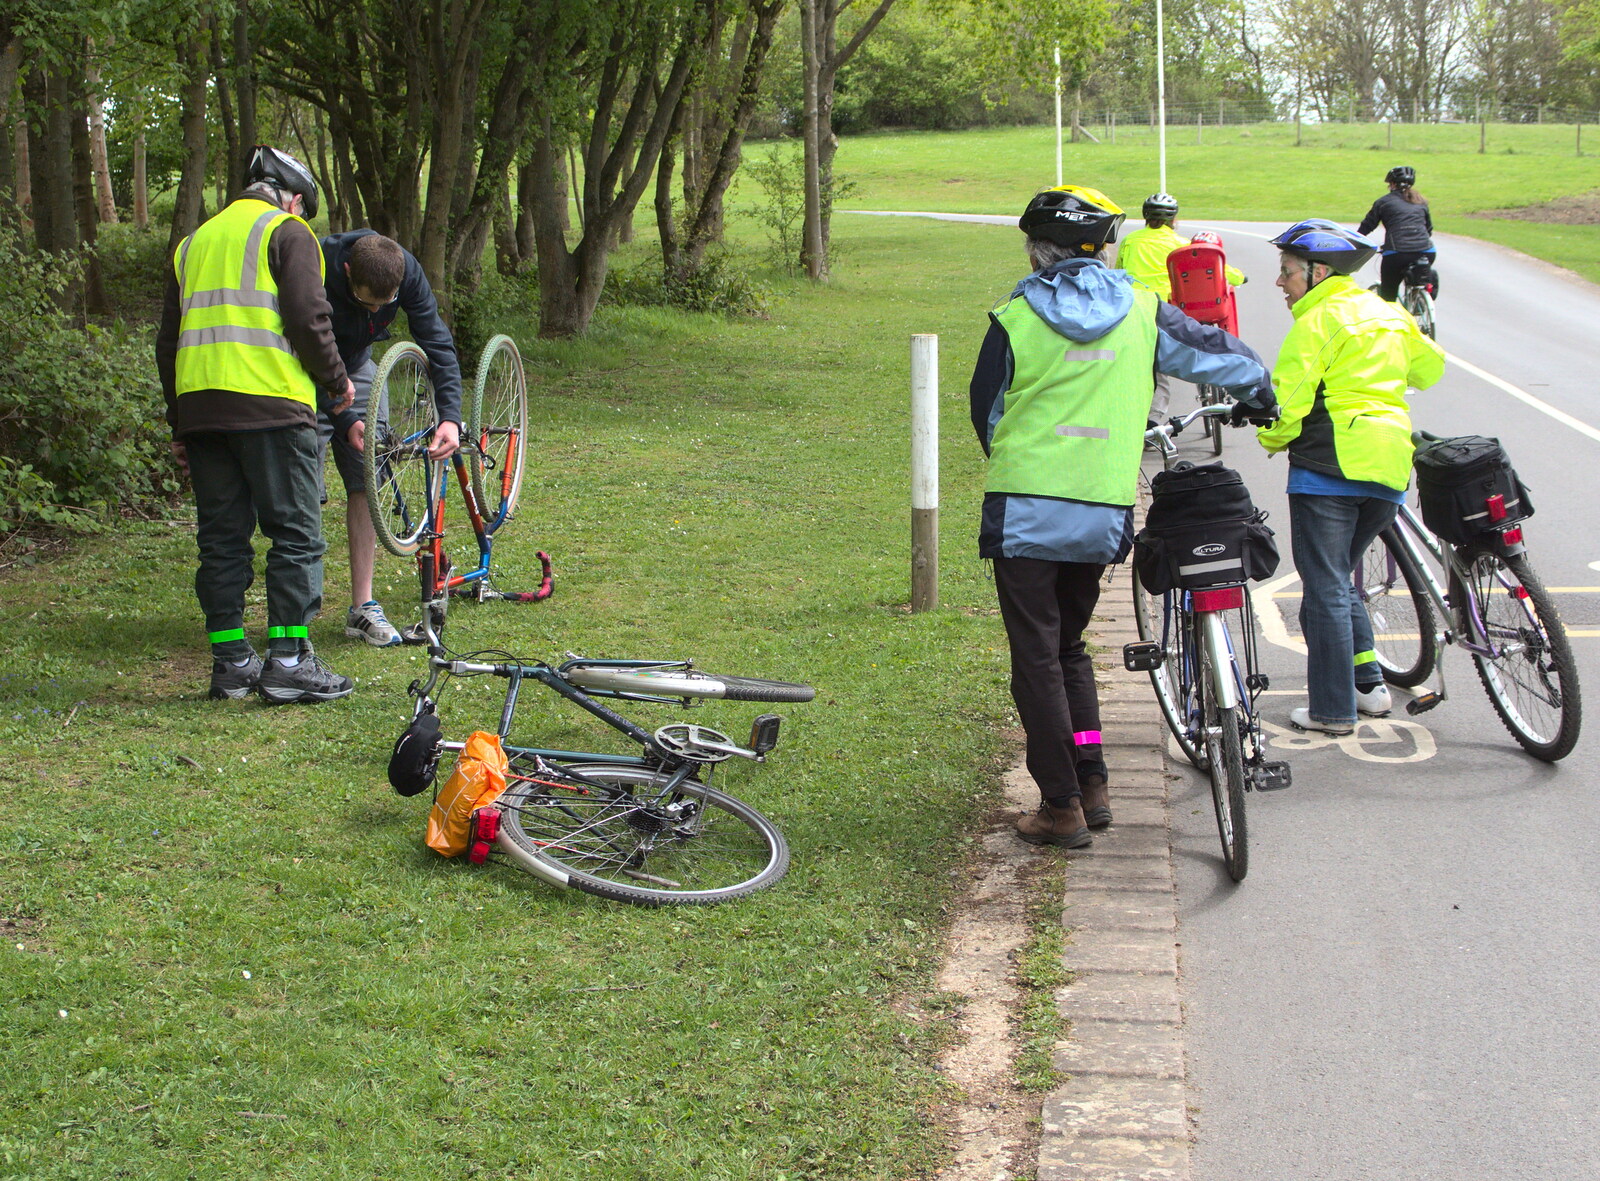 There's a pause for a breakdown from The BSCC Weekend Away, Lyddington, Rutland - 9th May 2015